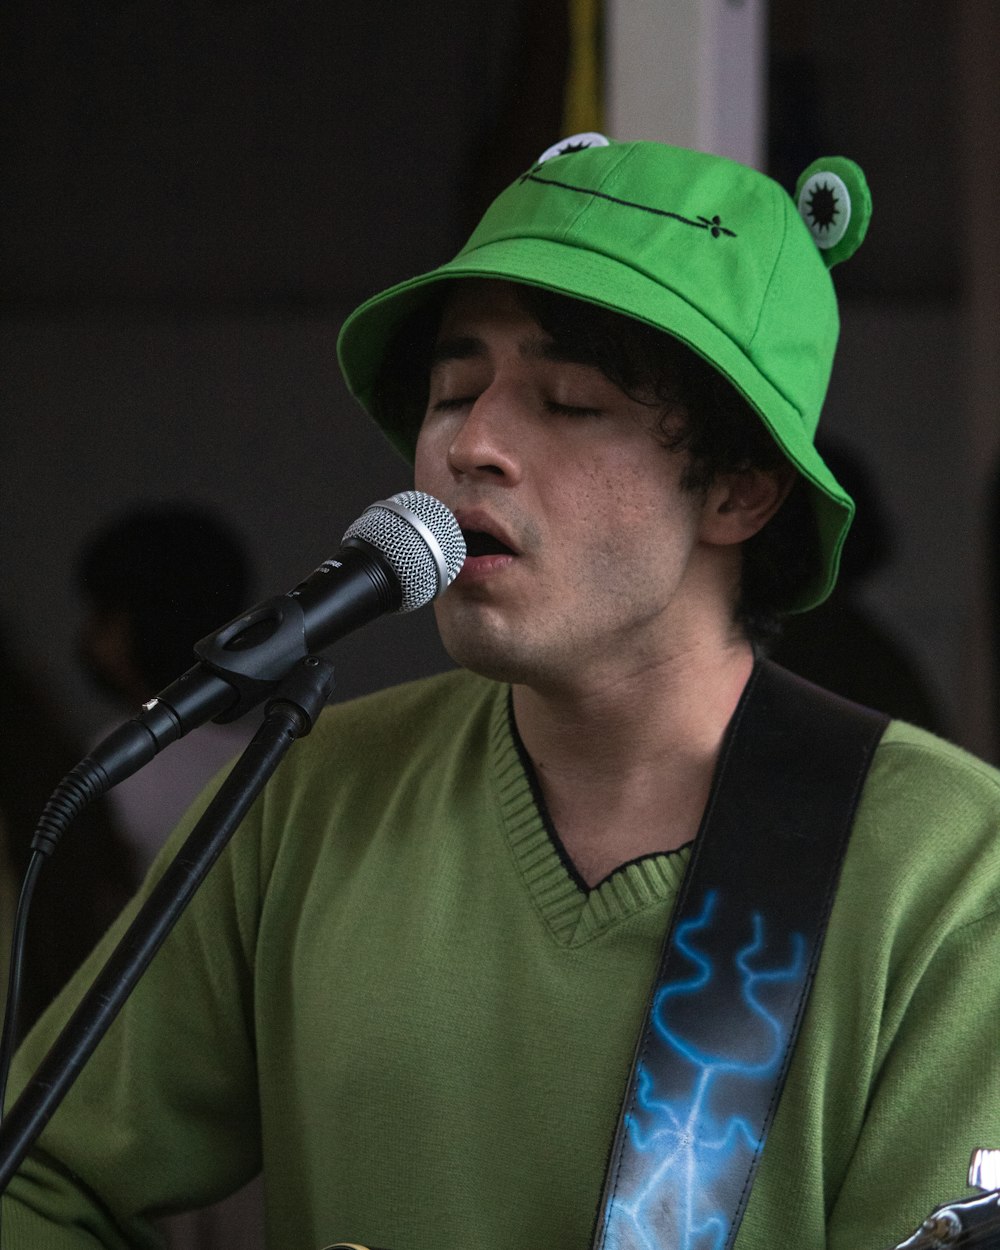 a man with a green hat playing a guitar